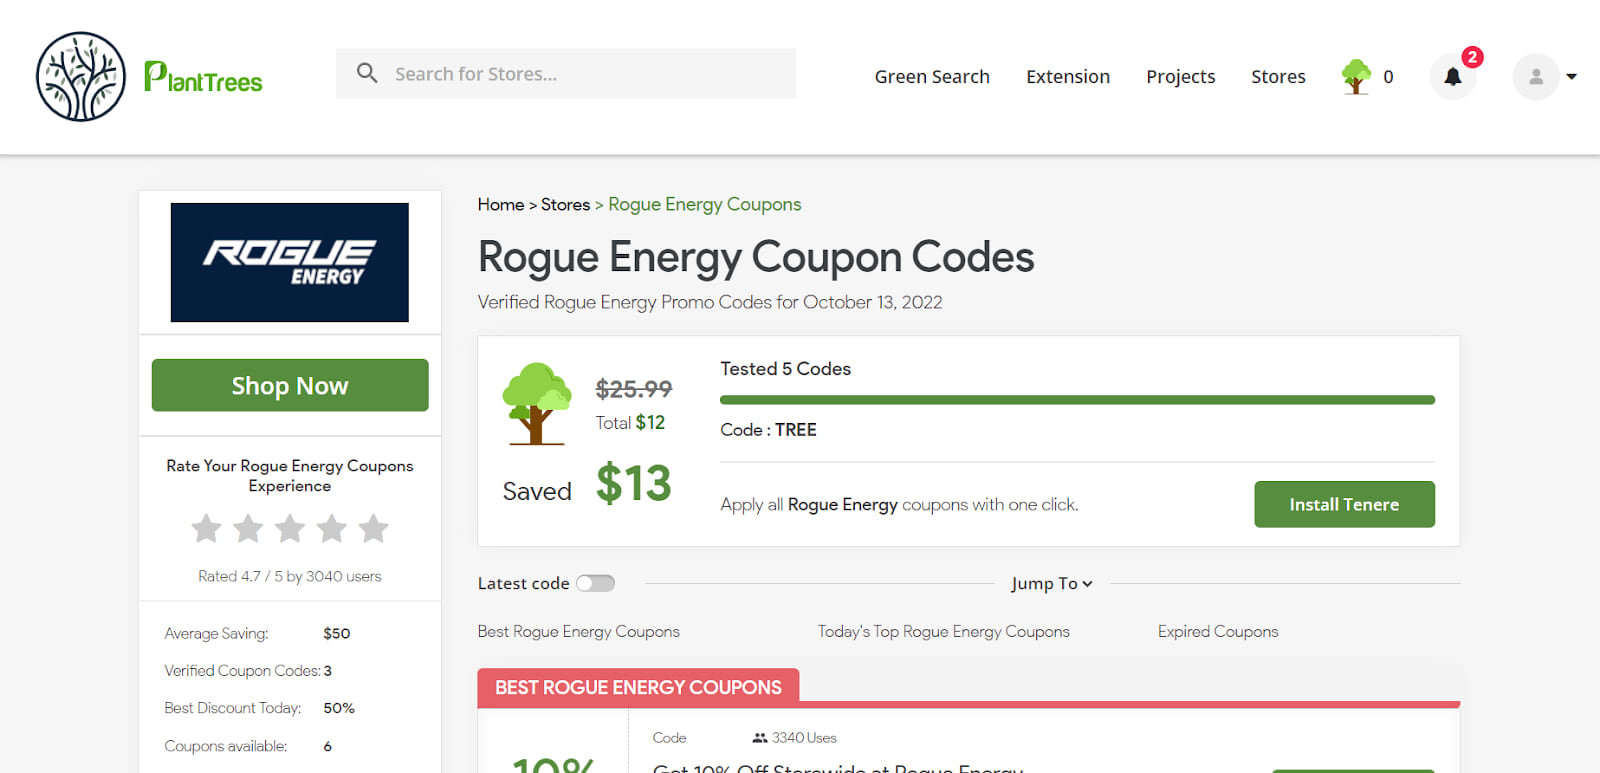 How to use Rogue Energy coupon